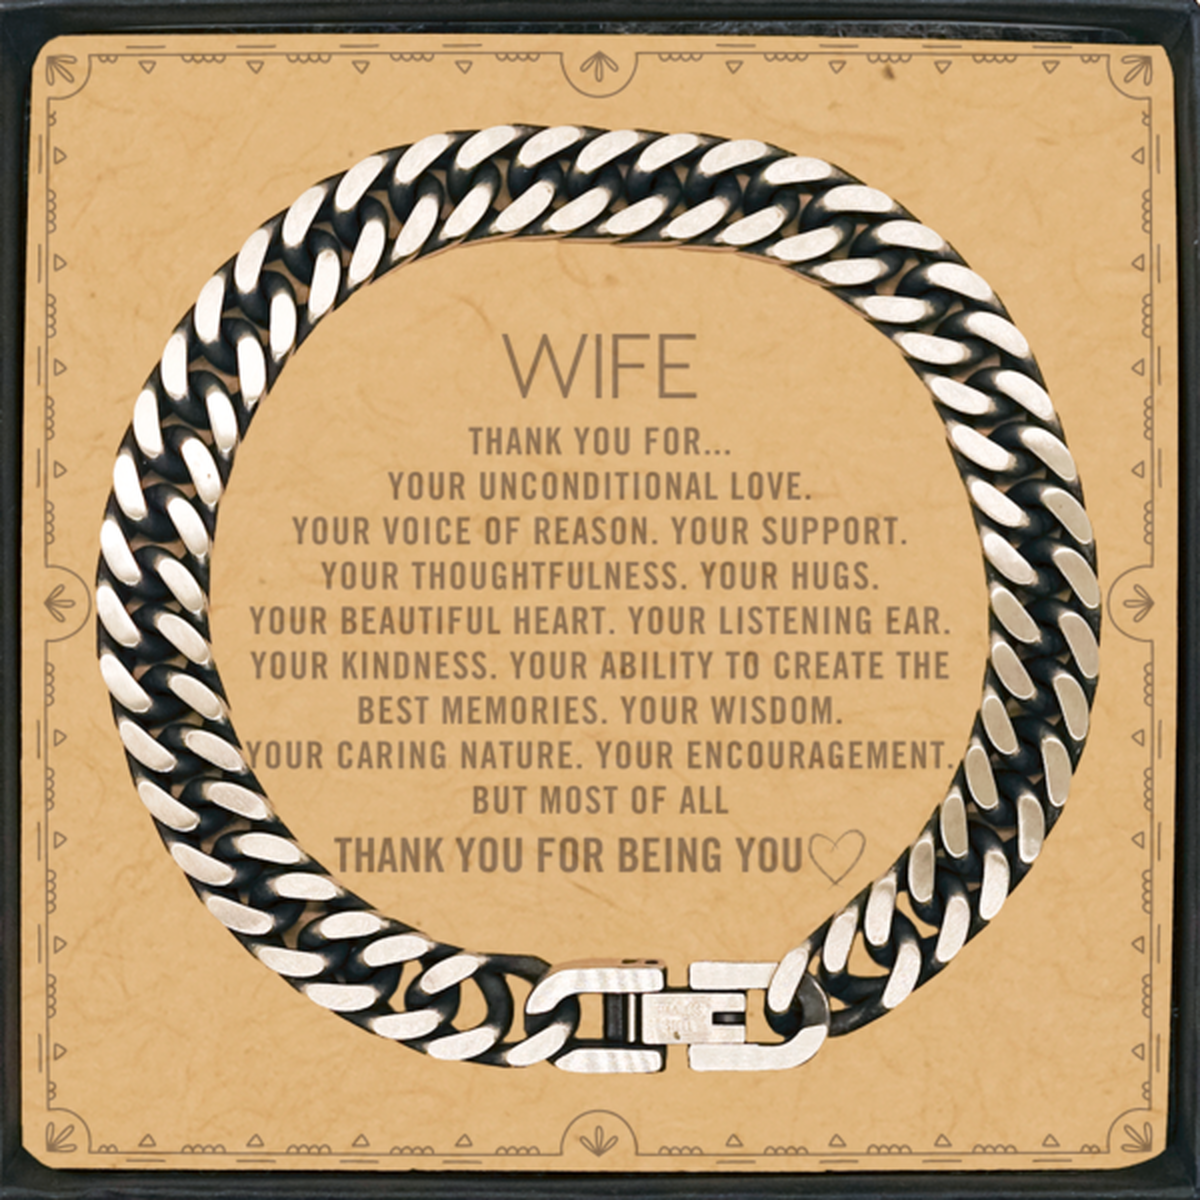 Wife Cuban Link Chain Bracelet Custom, Message Card Gifts For Wife Christmas Graduation Birthday Gifts for Men Women Wife Thank you for Your unconditional love